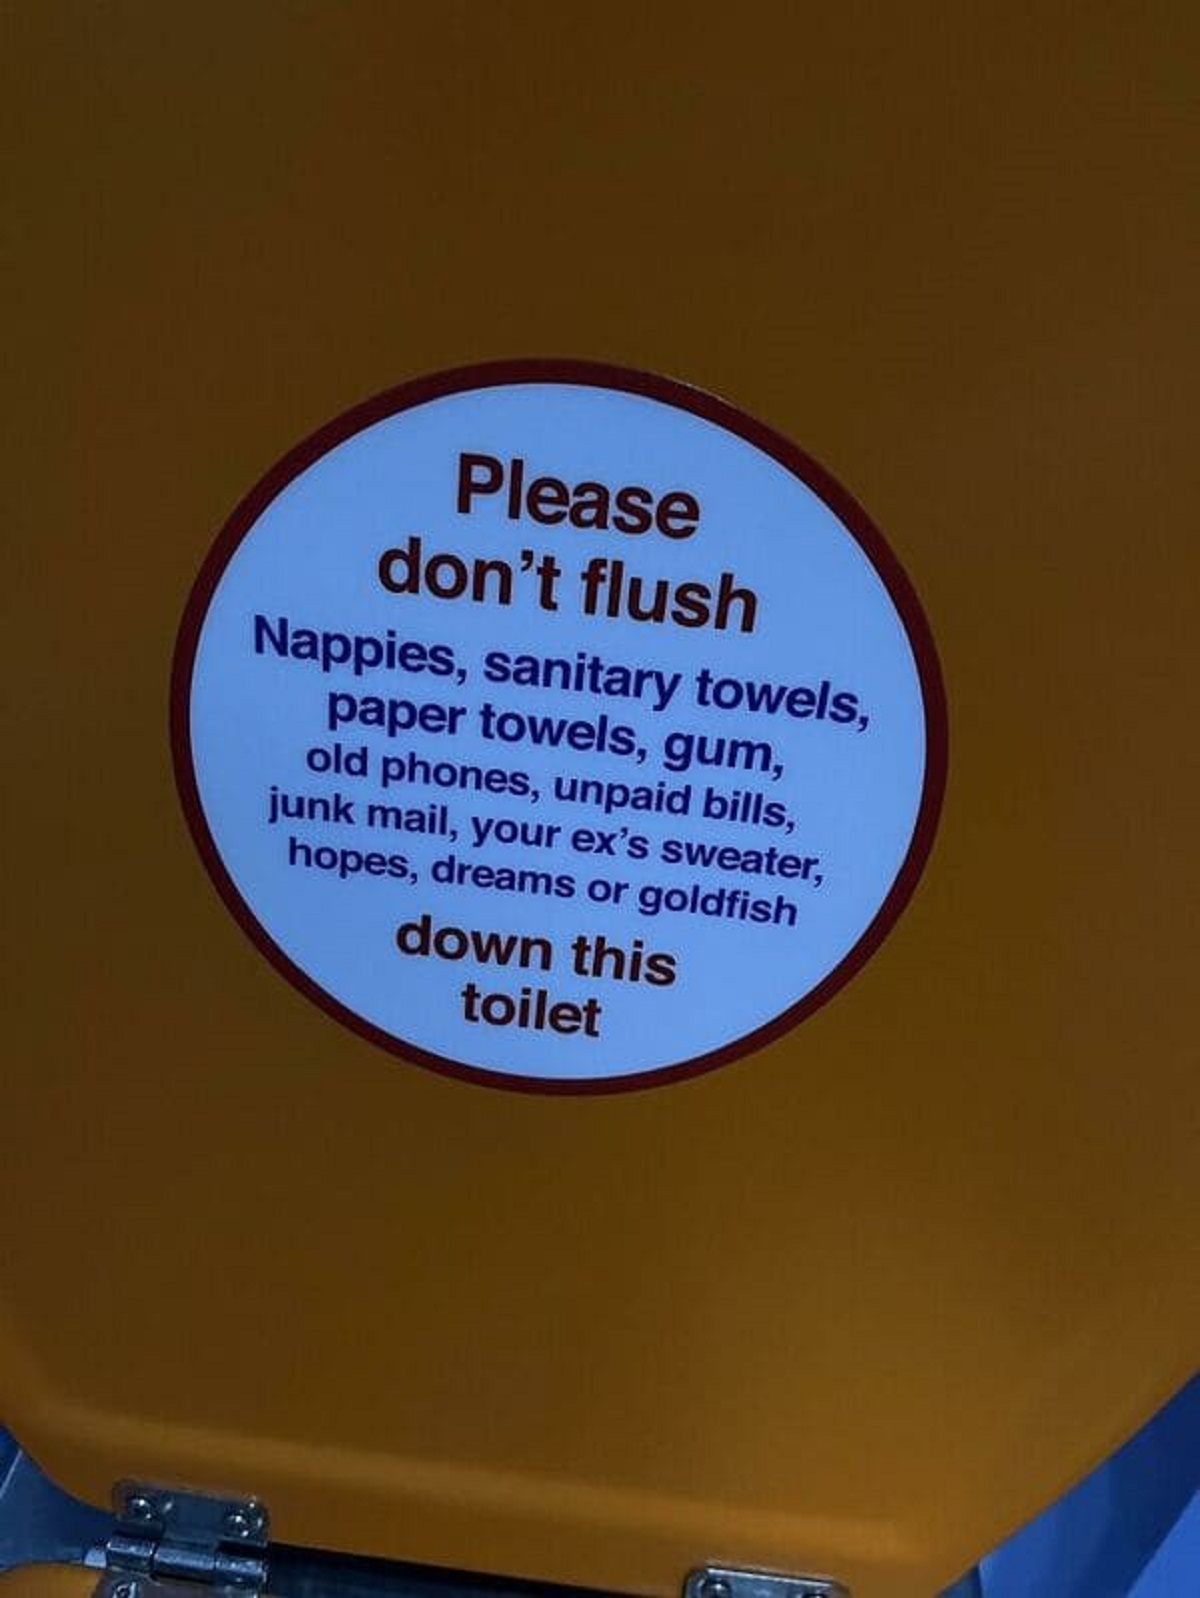 “UK – Southwestern Trains Trying A Little Toilet Humour”